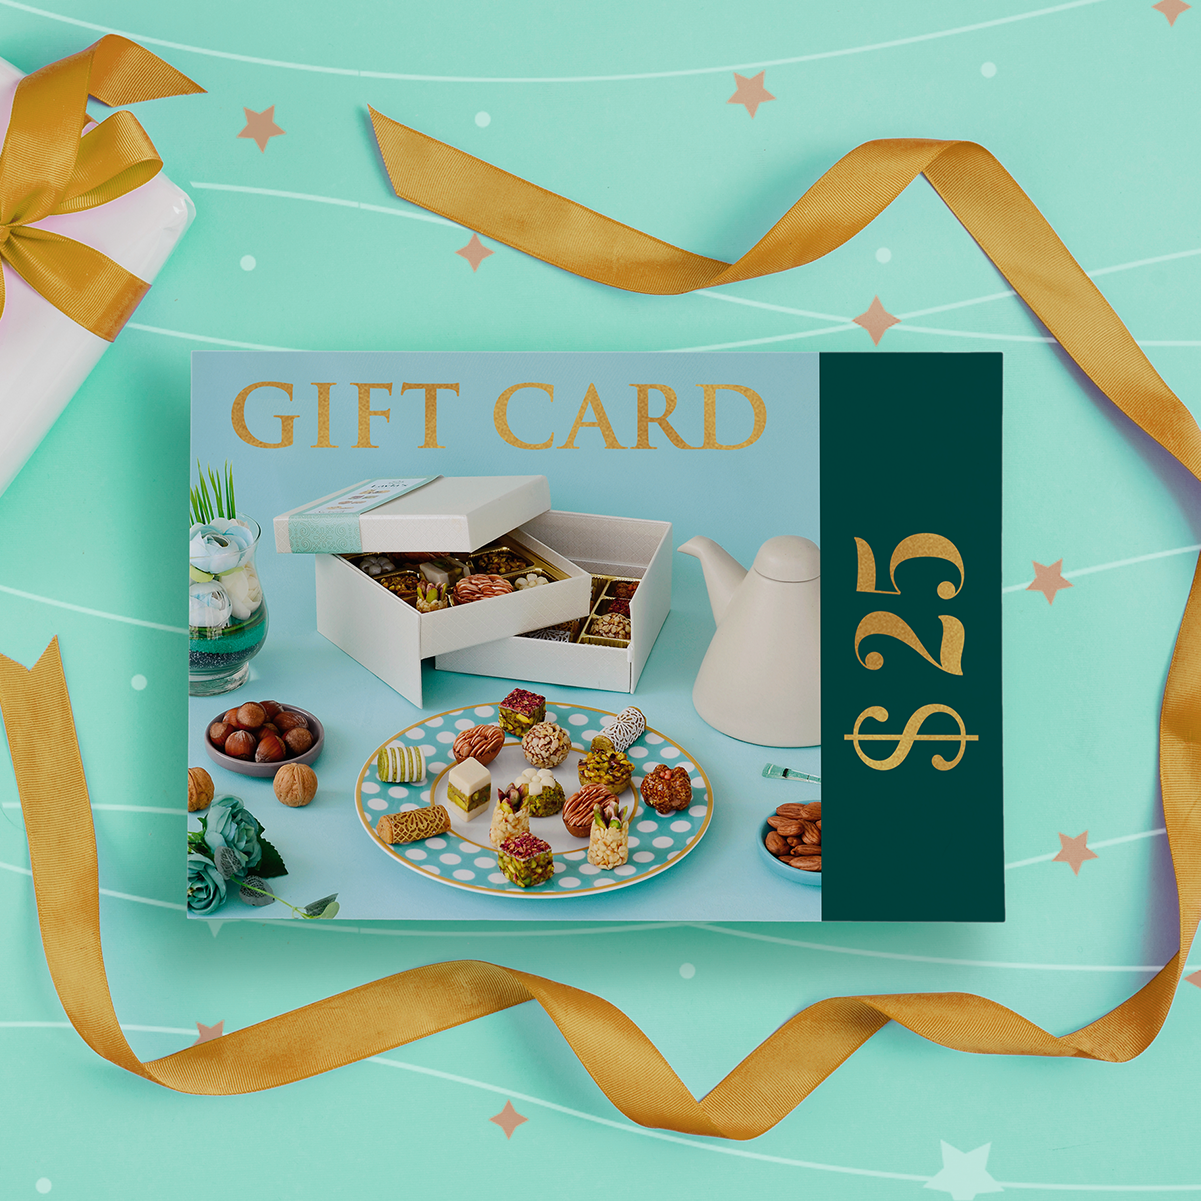 Gift Card - The Gift of Comfort